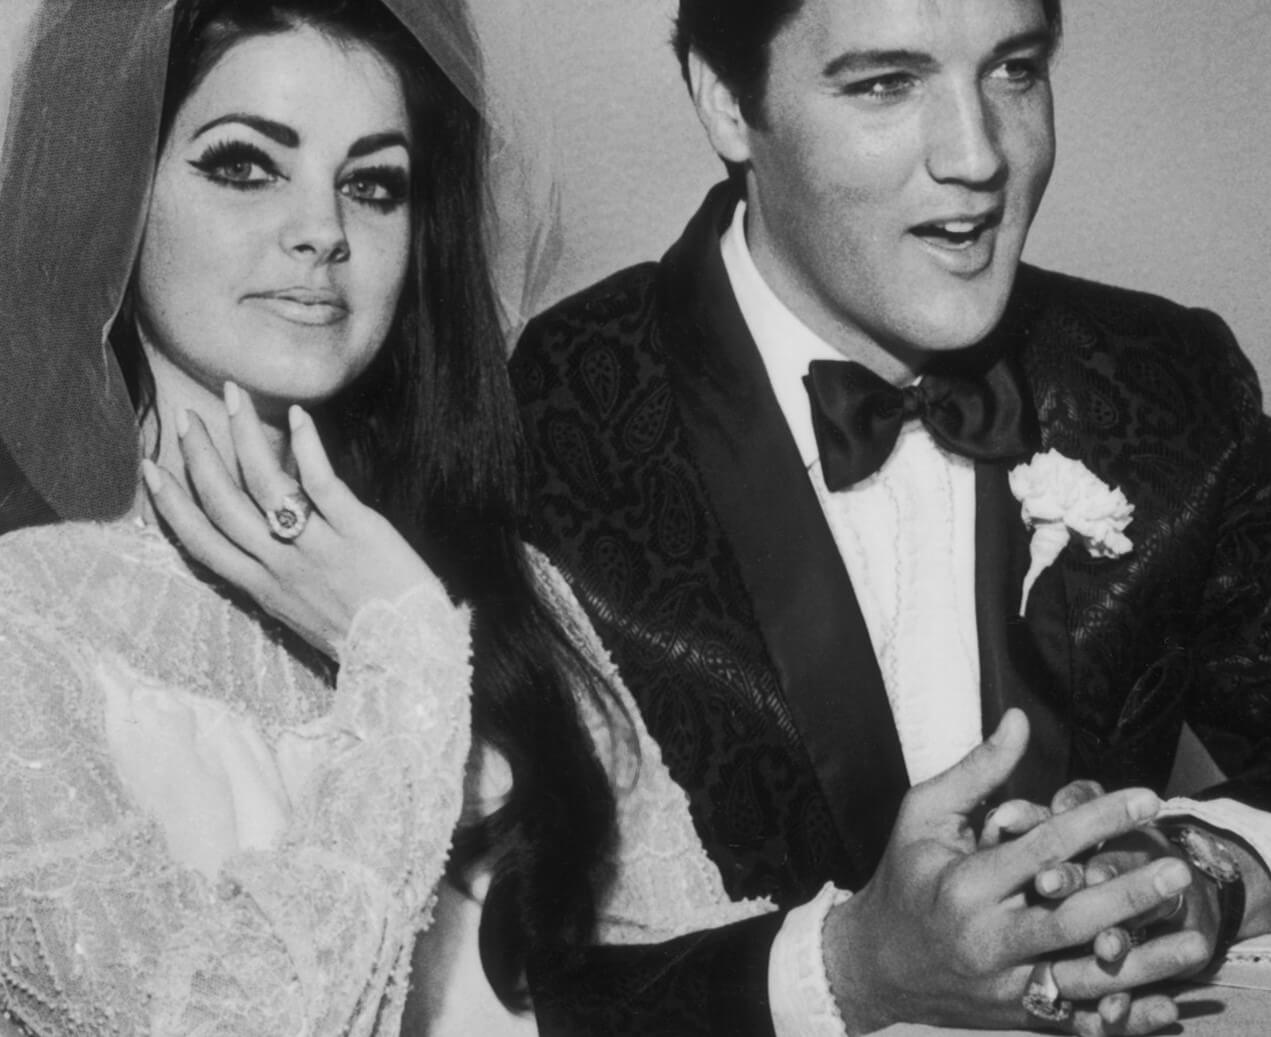 Priscilla Presley and "If I Can Dream" singer Elvis Presley in black-and-white